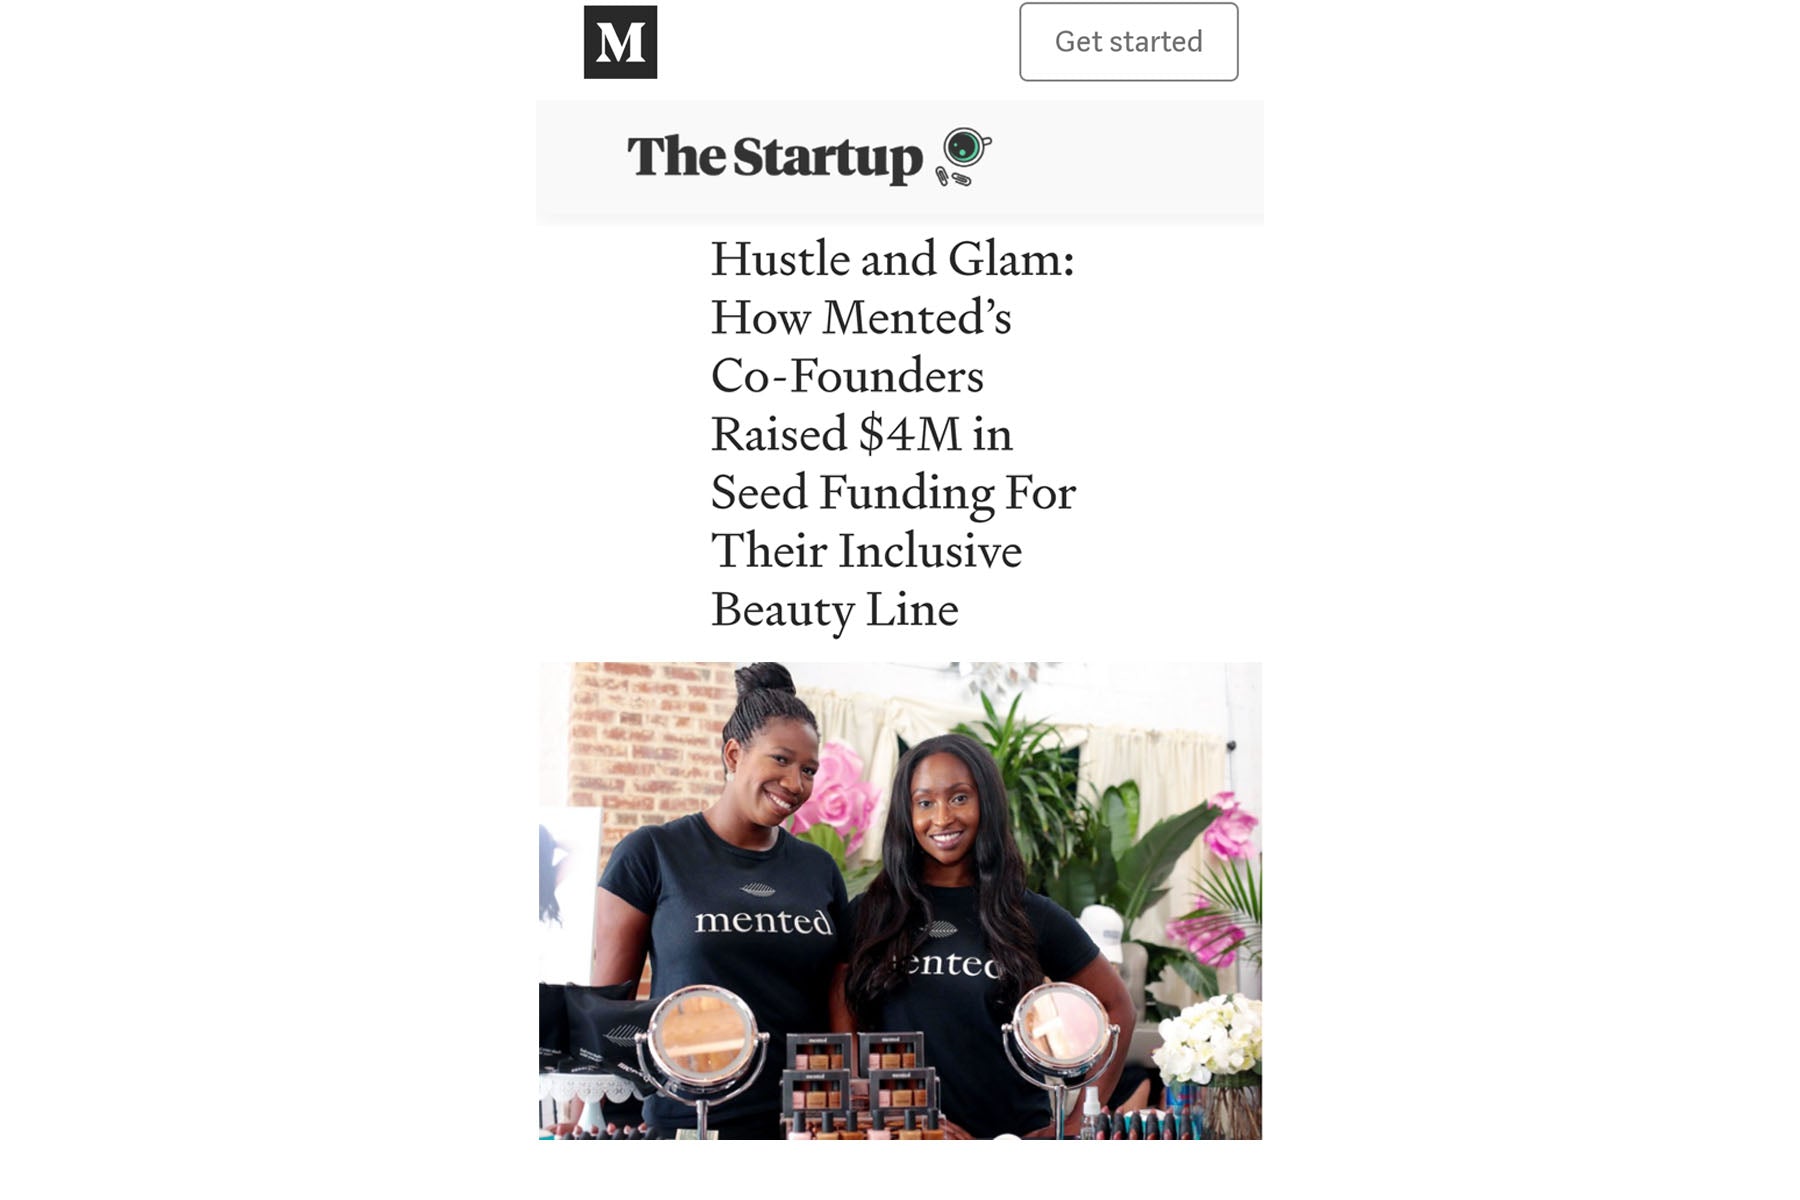 Hustle and Glam: How Mented’s Co-Founders Raised $4M in Seed Funding For Their Inclusive Beauty Line